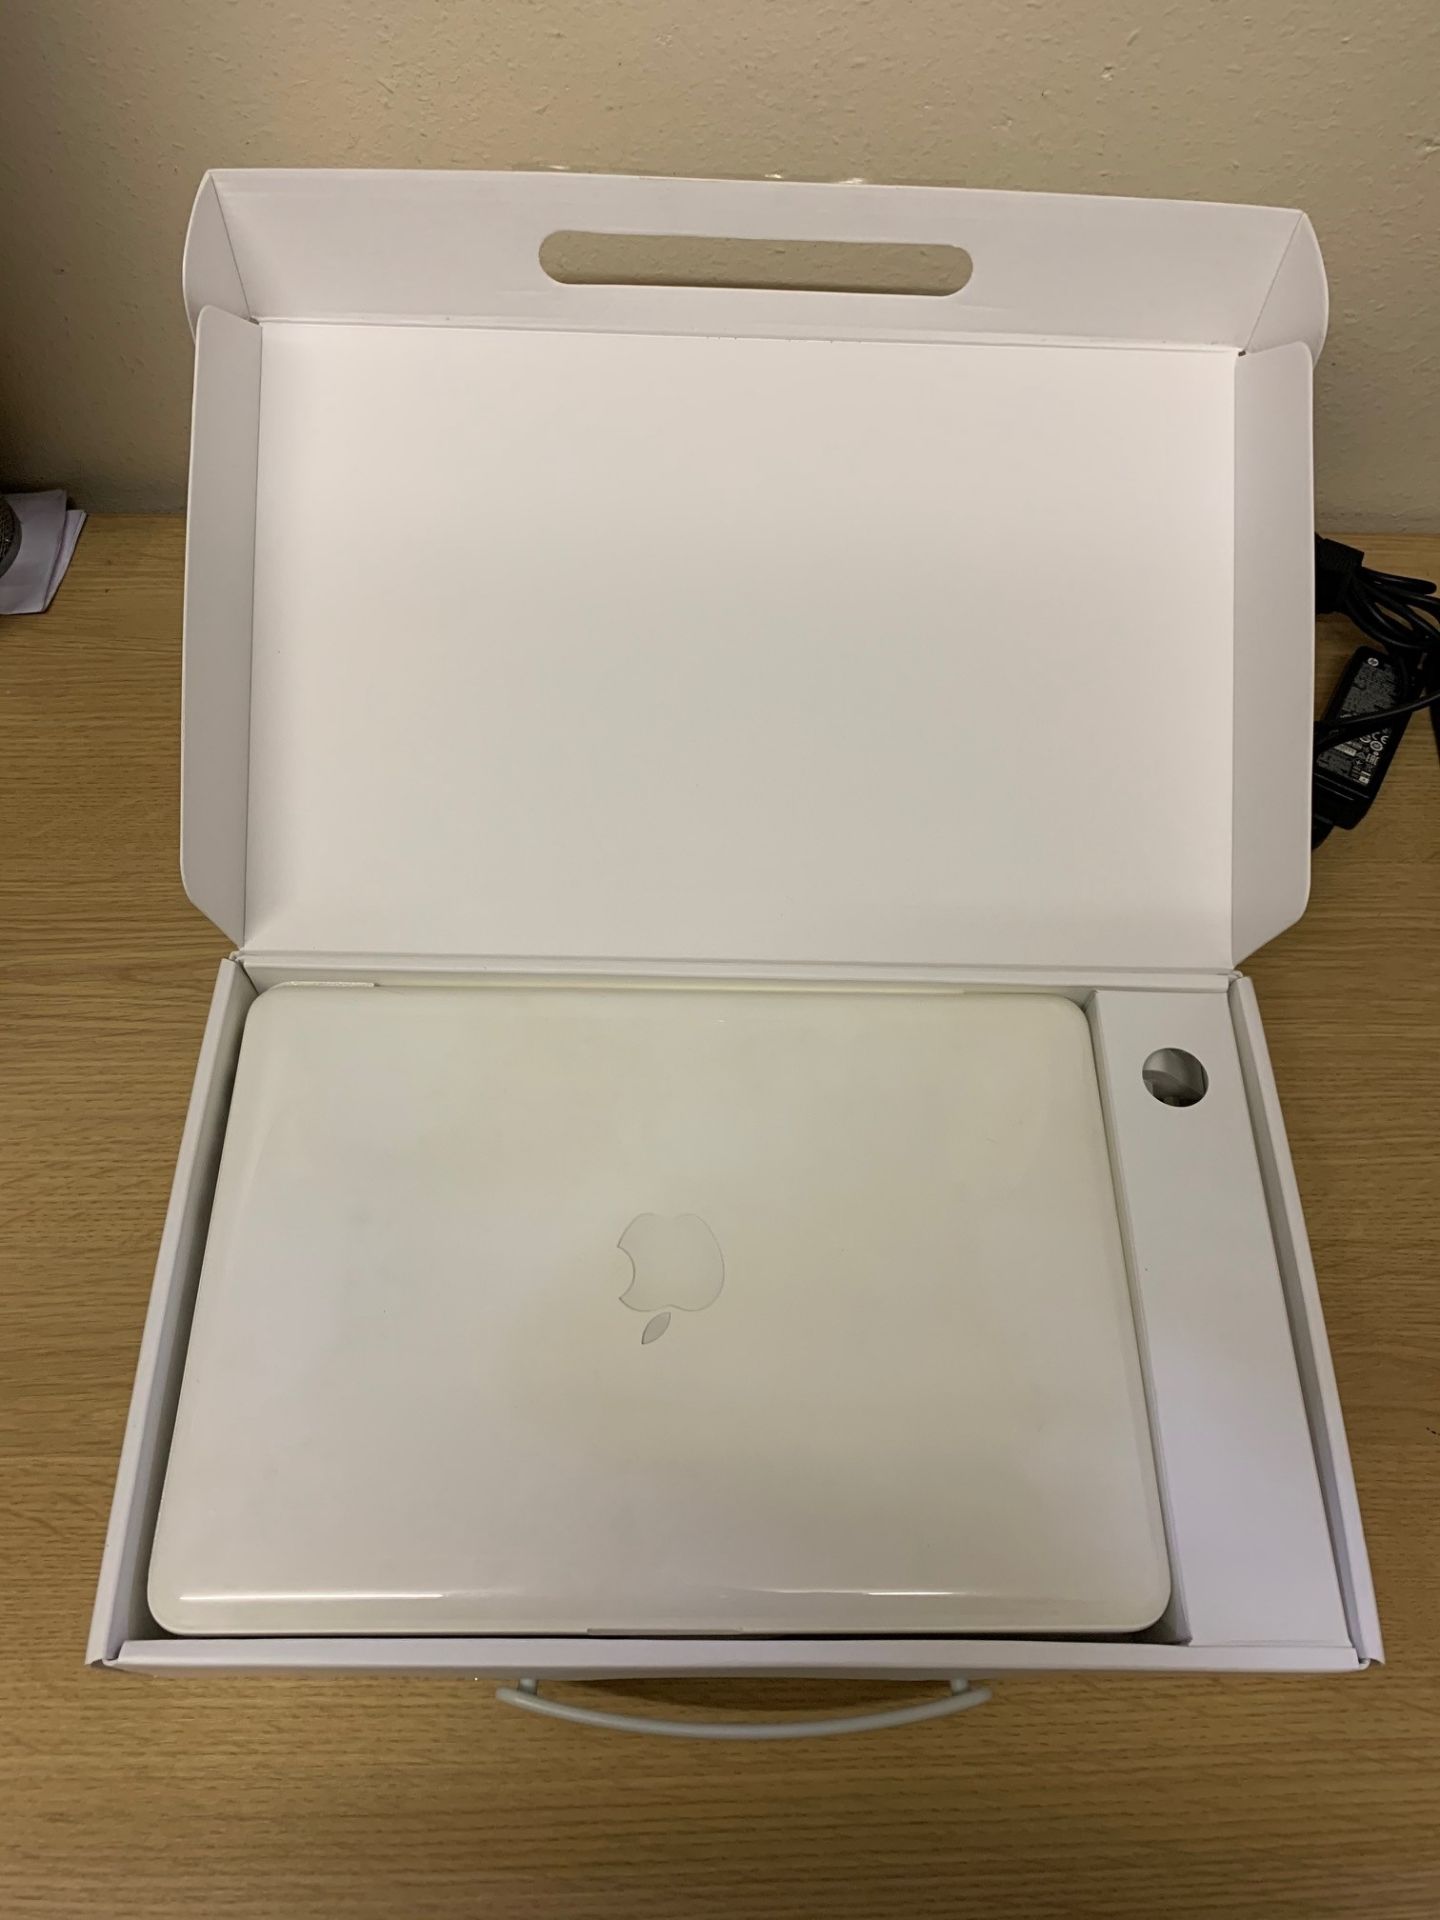 Apple MacBook - Model A1342, 2.4GHz, 250GB Hard Drive, Includes Box & Charger - Image 3 of 4